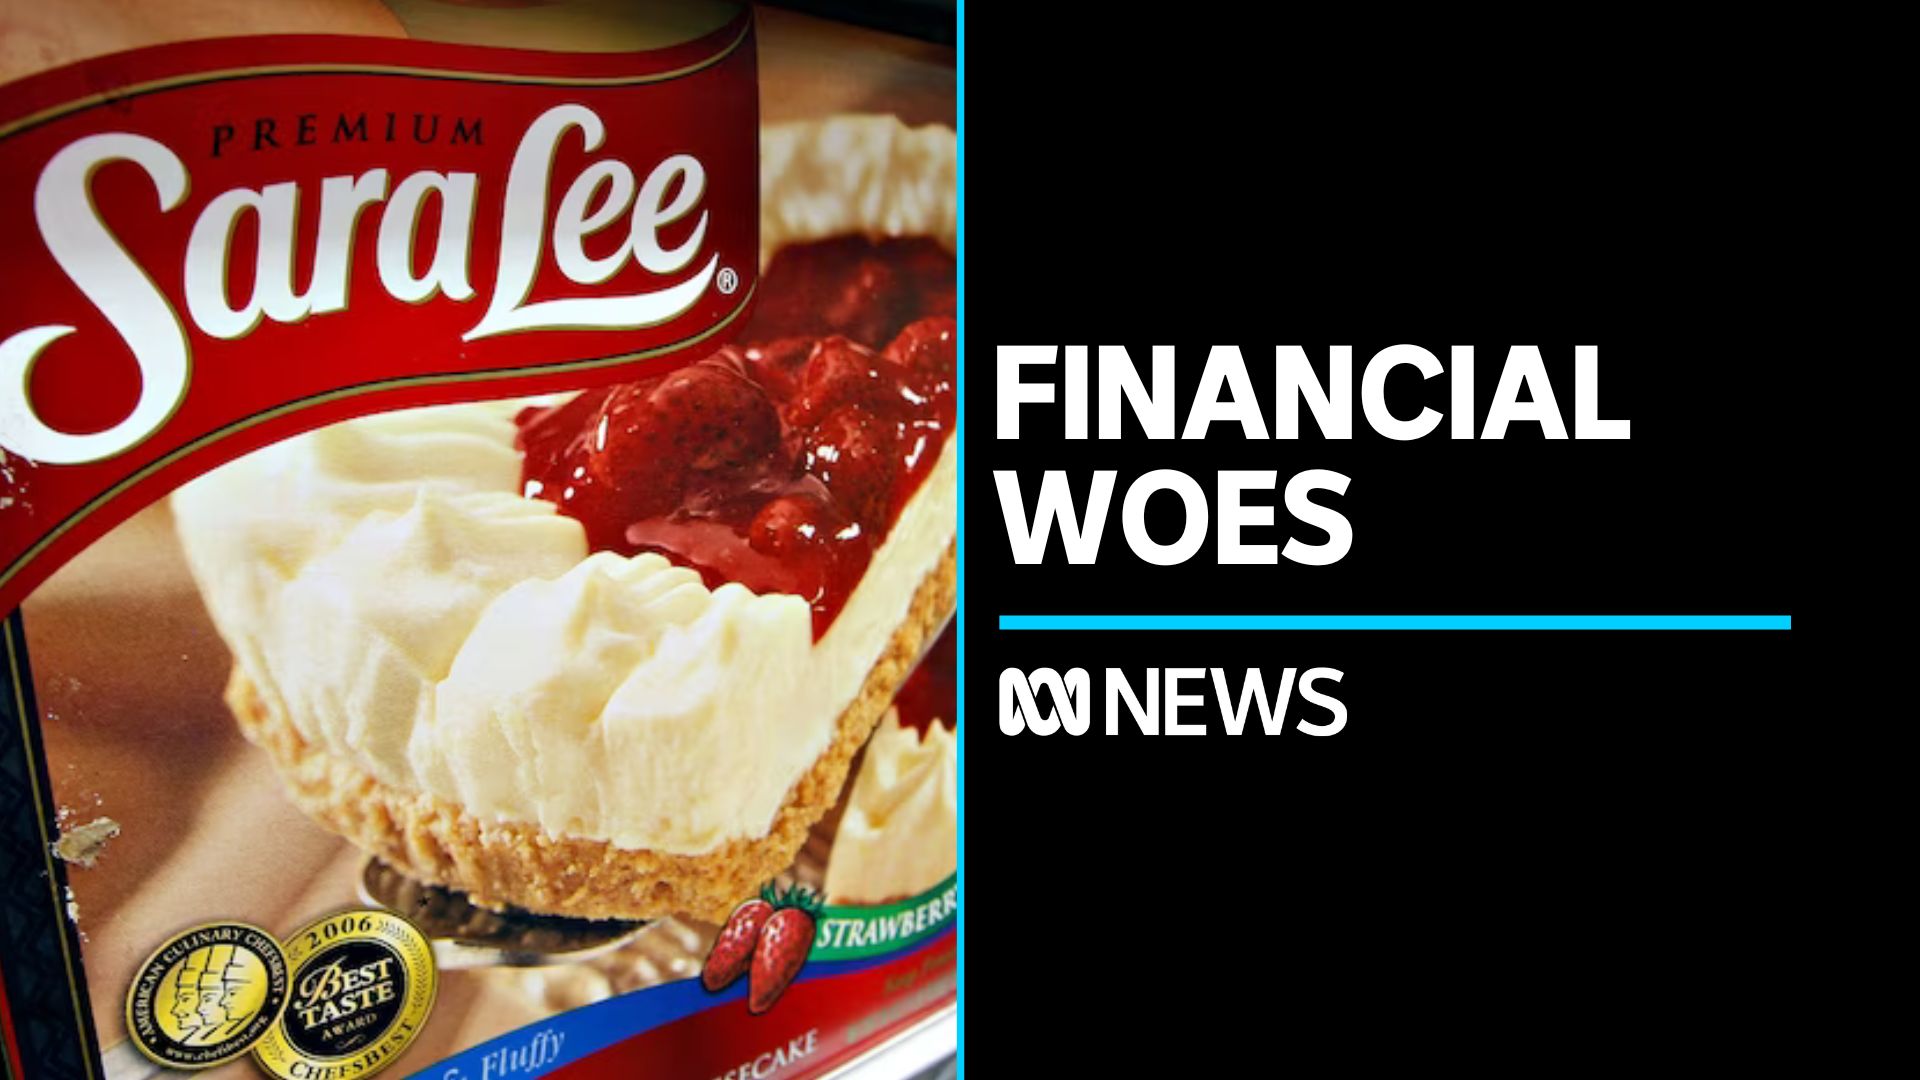 Australia's Sara Lee memories, defrosted: 'Such an iconic part of